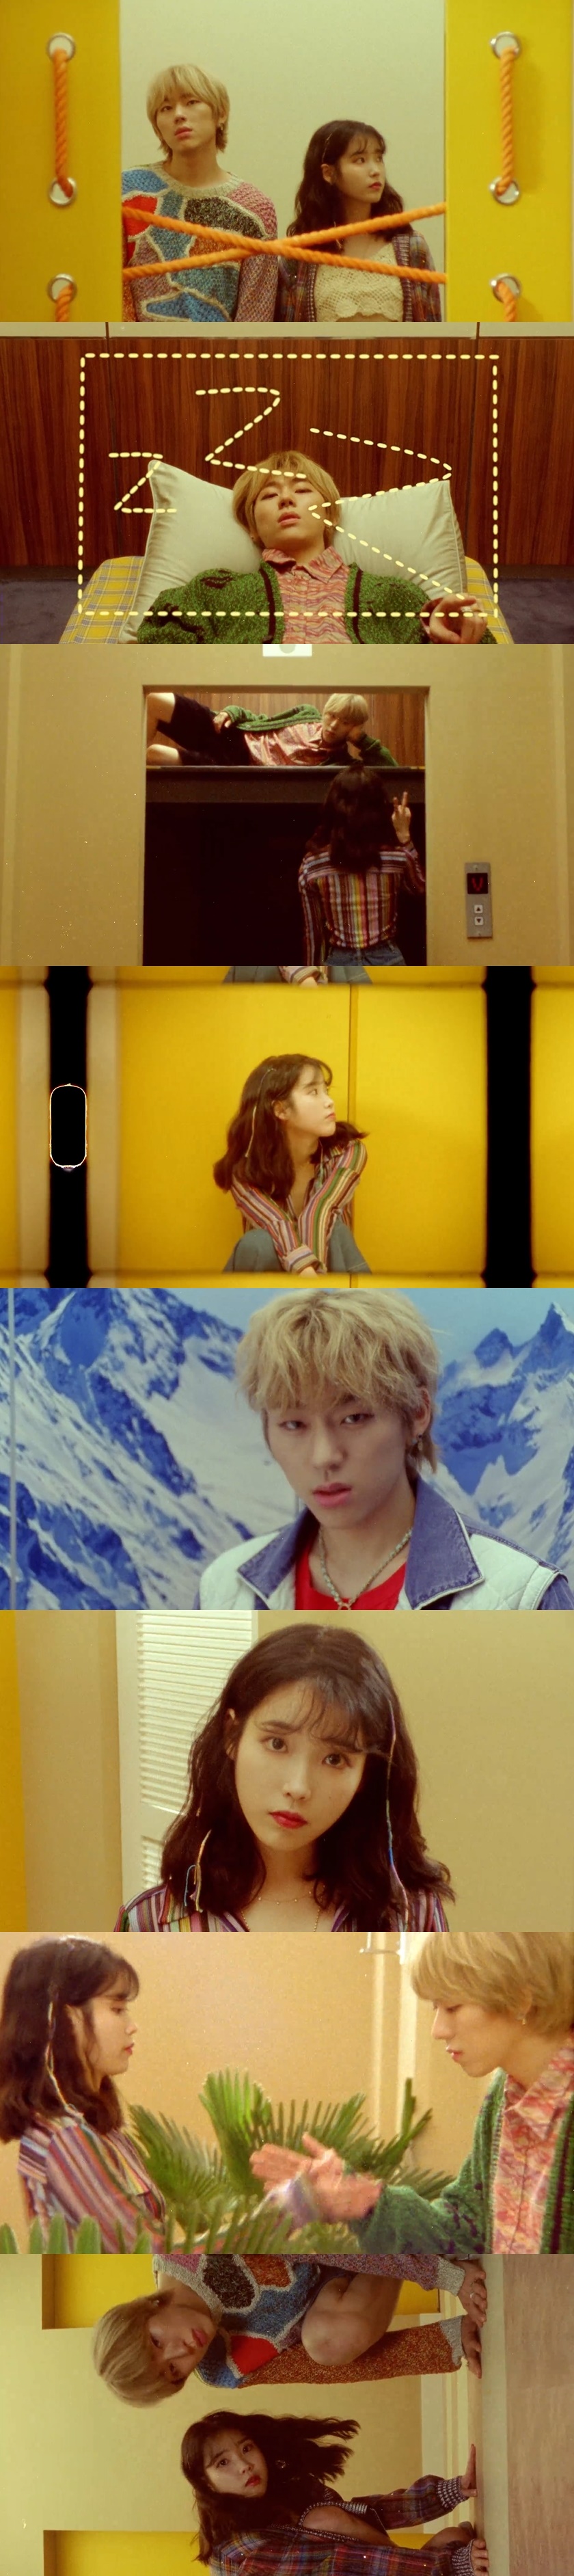 There was no difference or disagreement: Singer Zico, IU, won the top of the soundtrack chart with a pumice of nine years.Zico released its new digital single Soul Mate through various soundtrack sites at 6 p.m. on July 30.The single was the new song released a year after Zicos solo mini-television album TELEVISION released last year, attracting music fans attention.Zico, who made his debut in the music industry with Group Block B in 2011 and left a number of hits with his own song as a title song, has been active as a solo singer and producer Zico as well as producer of Block B.Shes a Baby (Shes a Baby) and You Are Me, which show acoustic sensibility, not just in Tough Cookie (Turf Cookie), Yes Or No, Artist, and so on.If you have a new song after continuing to grow steadily through various genres and charm music, you have secured the position of sweeping the top of the charts.The new SoulMate is a track of R & B soul genres with impressive vintage arrangements.Once again, Zico, who was the main lyricist, composition, and arranger, filled the track with real musical instrument sound such as trumpet, saxophone, and trumpet, and created a famous song with analog sensibility.IU, which has as much outstanding musicality and powerful soundtrack power as Zico, also added.IU, which was shot to support Zicos feature at the time of the release of the title song IU...IM (IU...IM) in November 2009, went on Pumice in nine years.He also readily accepted the feature singer proposal of the Zico title song.As I have known him since childhood and have maintained a strong friendship as a fellow musician, the chemistry that I showed through the second collaboration was also completed at an impeccable level.The song SoulMate, which was written by two people, is based on the theme of Soul Mate, the only soul partner in the world, as it is in the word. I focused on the keyword Soul Mate itself, which means the best friend of the soul rather than limiting it to men and women.Soundtrack and the two in the music video boast a fantastic breath with Feelings, which seems to be talking between playfulness and seriousness.Zico has shown rhythmic and delicate high-tone vocals that contradict the intense and rough rapping that has been shown through many hits, which adds to the fun of listening in harmony with the vocals of the IUs pure and languid Feelings.Good songs naturally led to good grades.Except for Bugs, which ranked first at 7 pm, which was the first time in the first hour of soundtrack release, it entered second place on real-time charts such as Melon, Genie, Ole Music and Soribada, the largest soundtrack site in Korea, but it climbed to No. 1 on seven soundtrack charts including Melon at 8 pm in two hours.It is a proud stop to the top march of Seans Way Back Home (way back home), which was surrounded by soundtrack hoarding and chart manipulation allegations.In particular, as of 9 p.m. on the day, he achieved success in the so-called roof kick (Melons record of the highest real-time share of the market). This is a proof that he is receiving such hot public attention.As of the next morning, it is still at the top of the list, so it is worth looking forward to the possibility of long-term control of the chart.hwang hye-jin